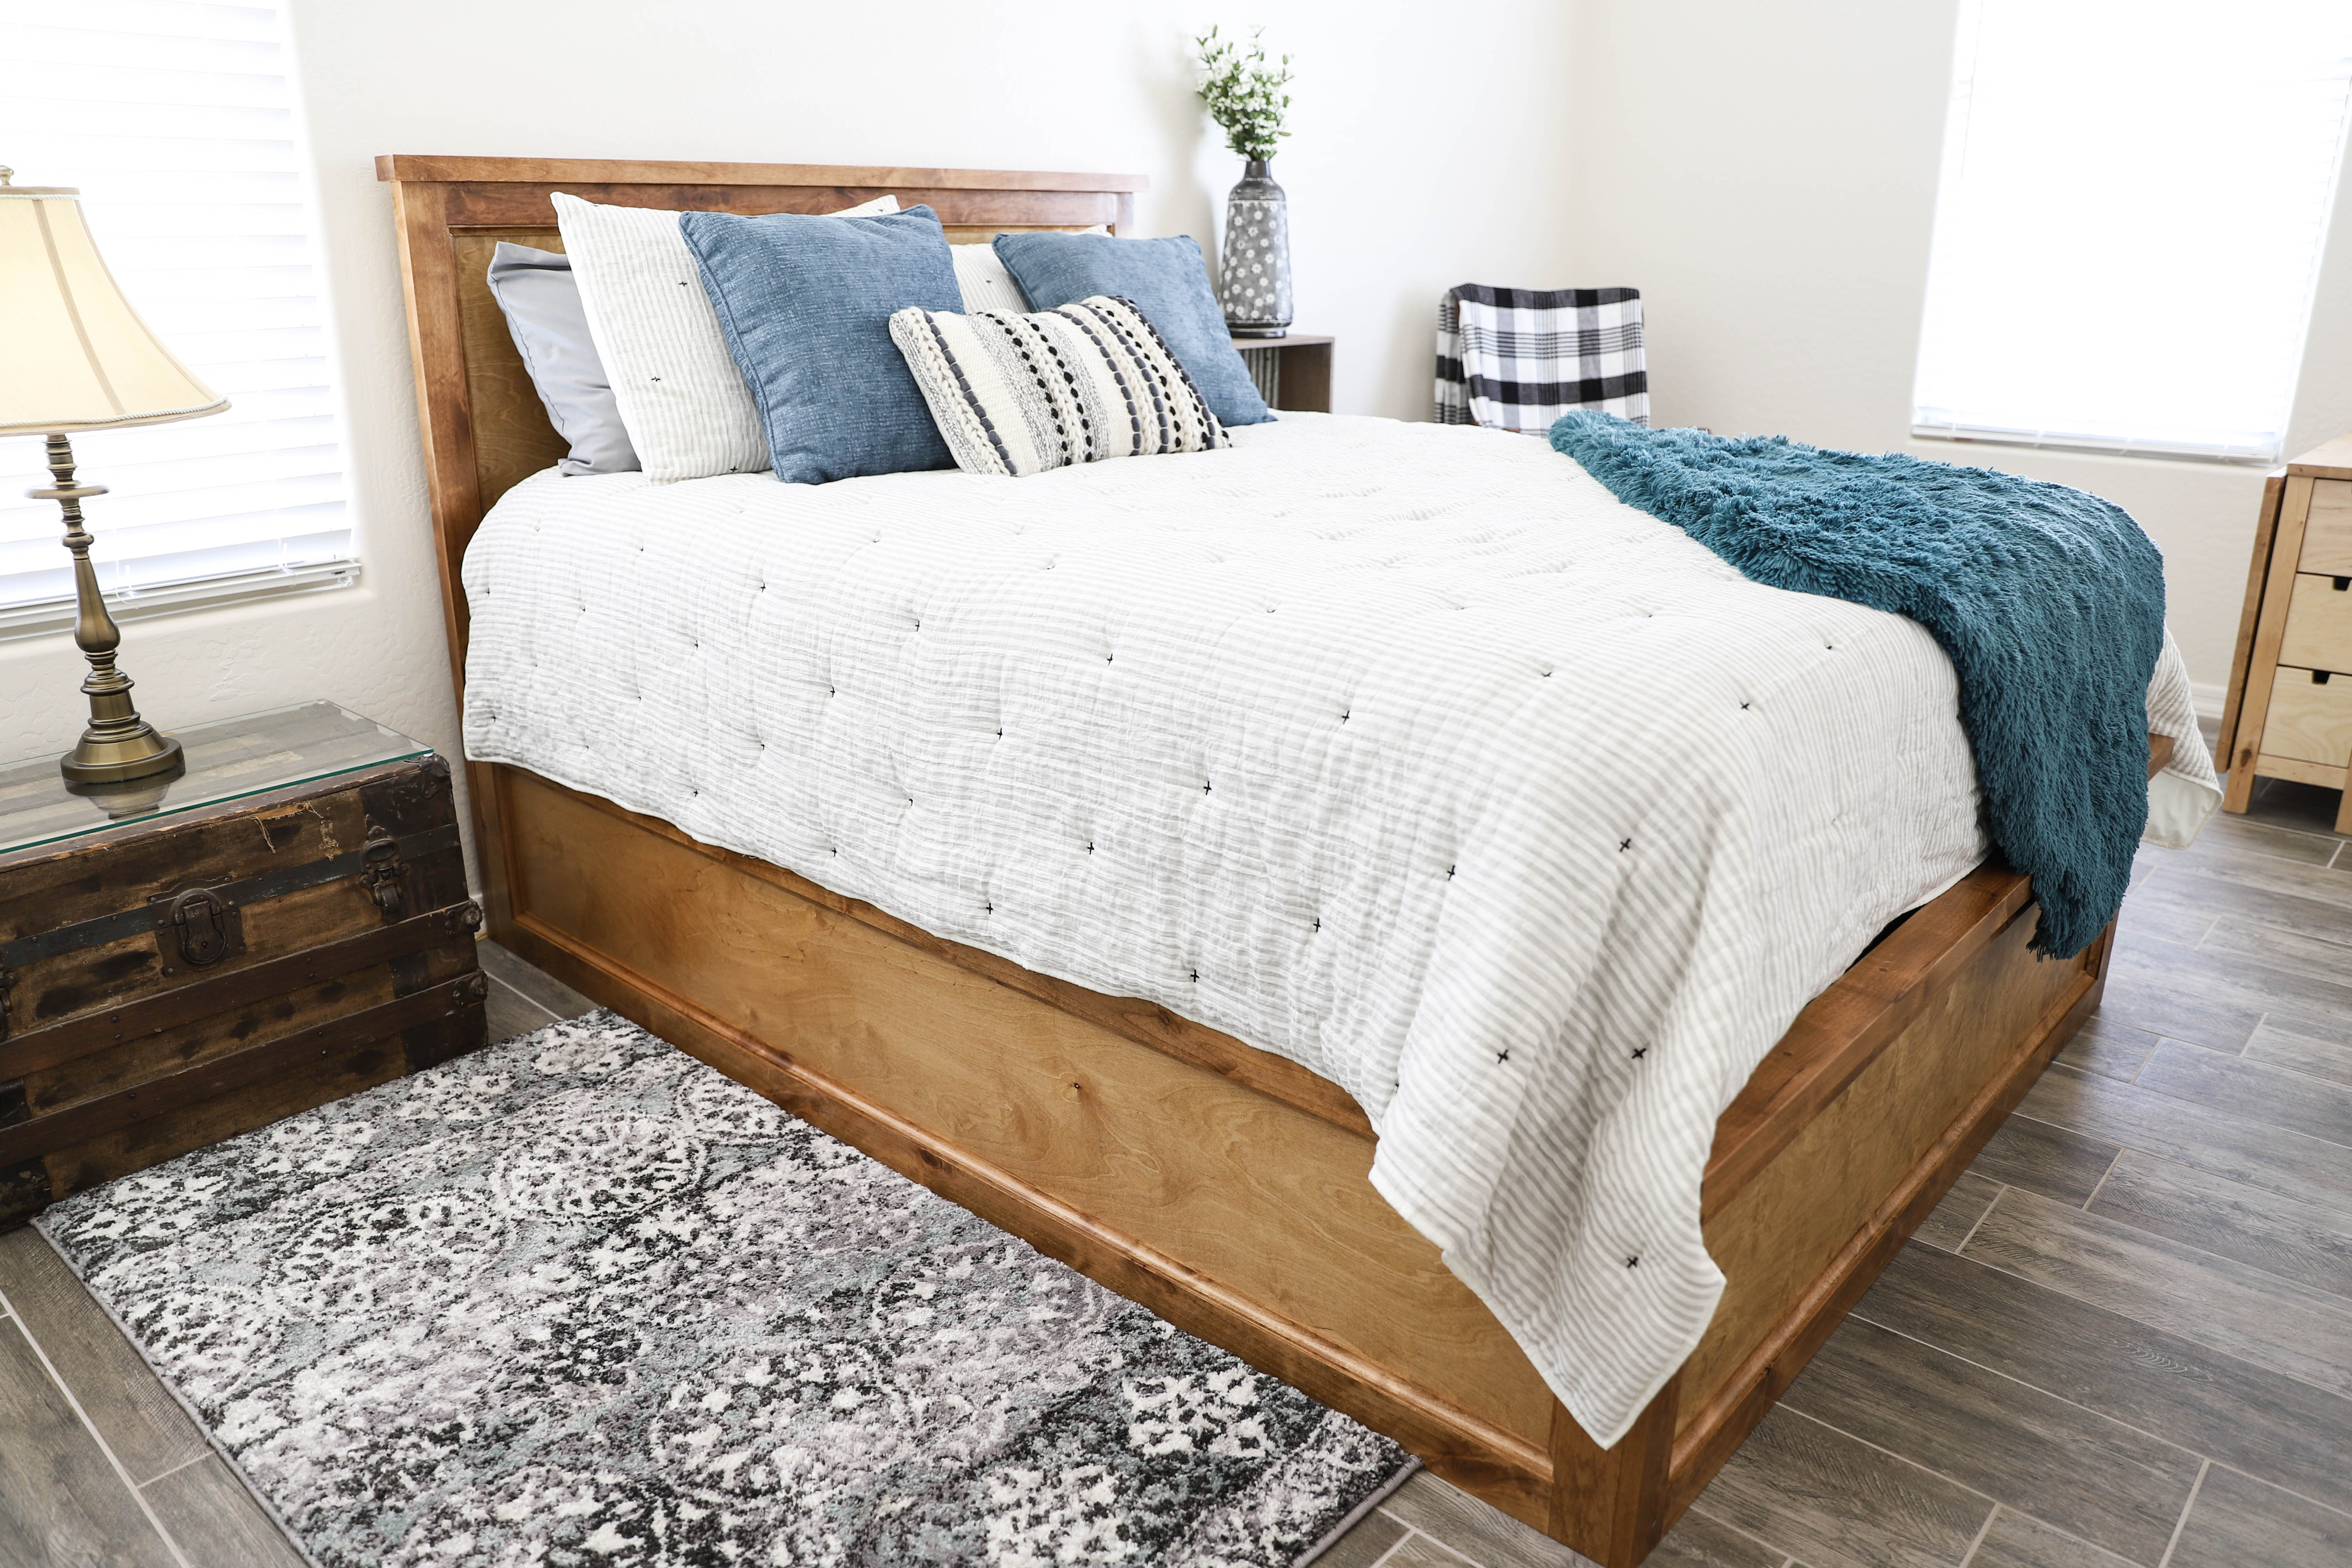 How To Build A Queen Size Storage Bed, King Bed Frame With Storage And Headboard Plans